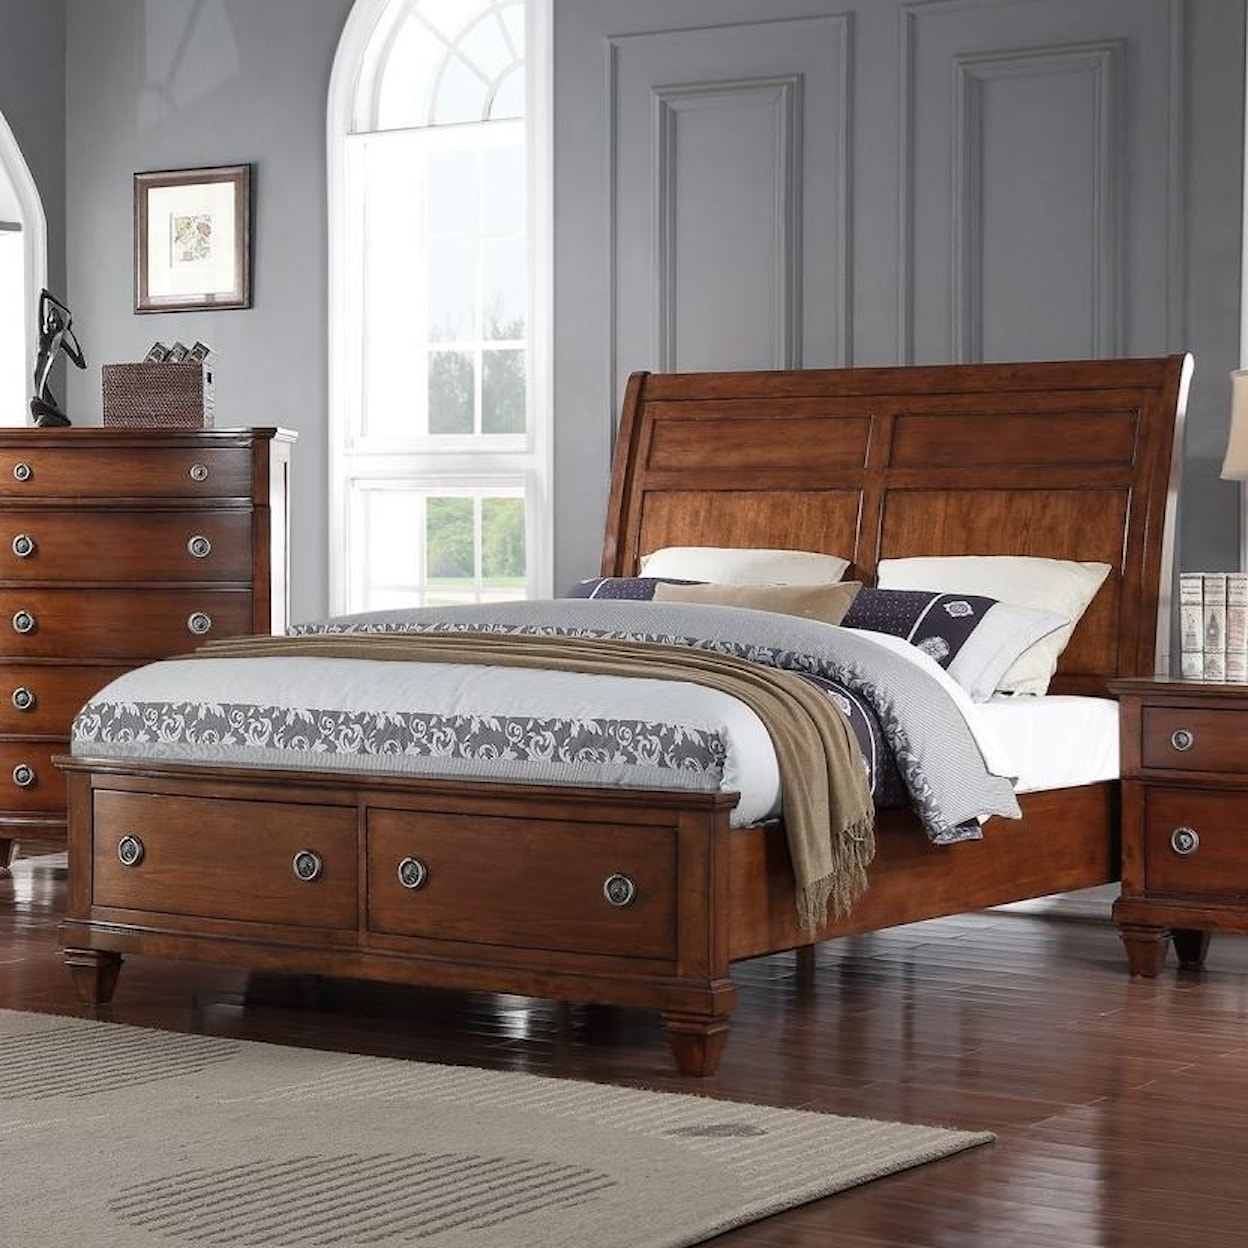 Avalon Furniture B068 King Storage Bed with Sleigh Headboard